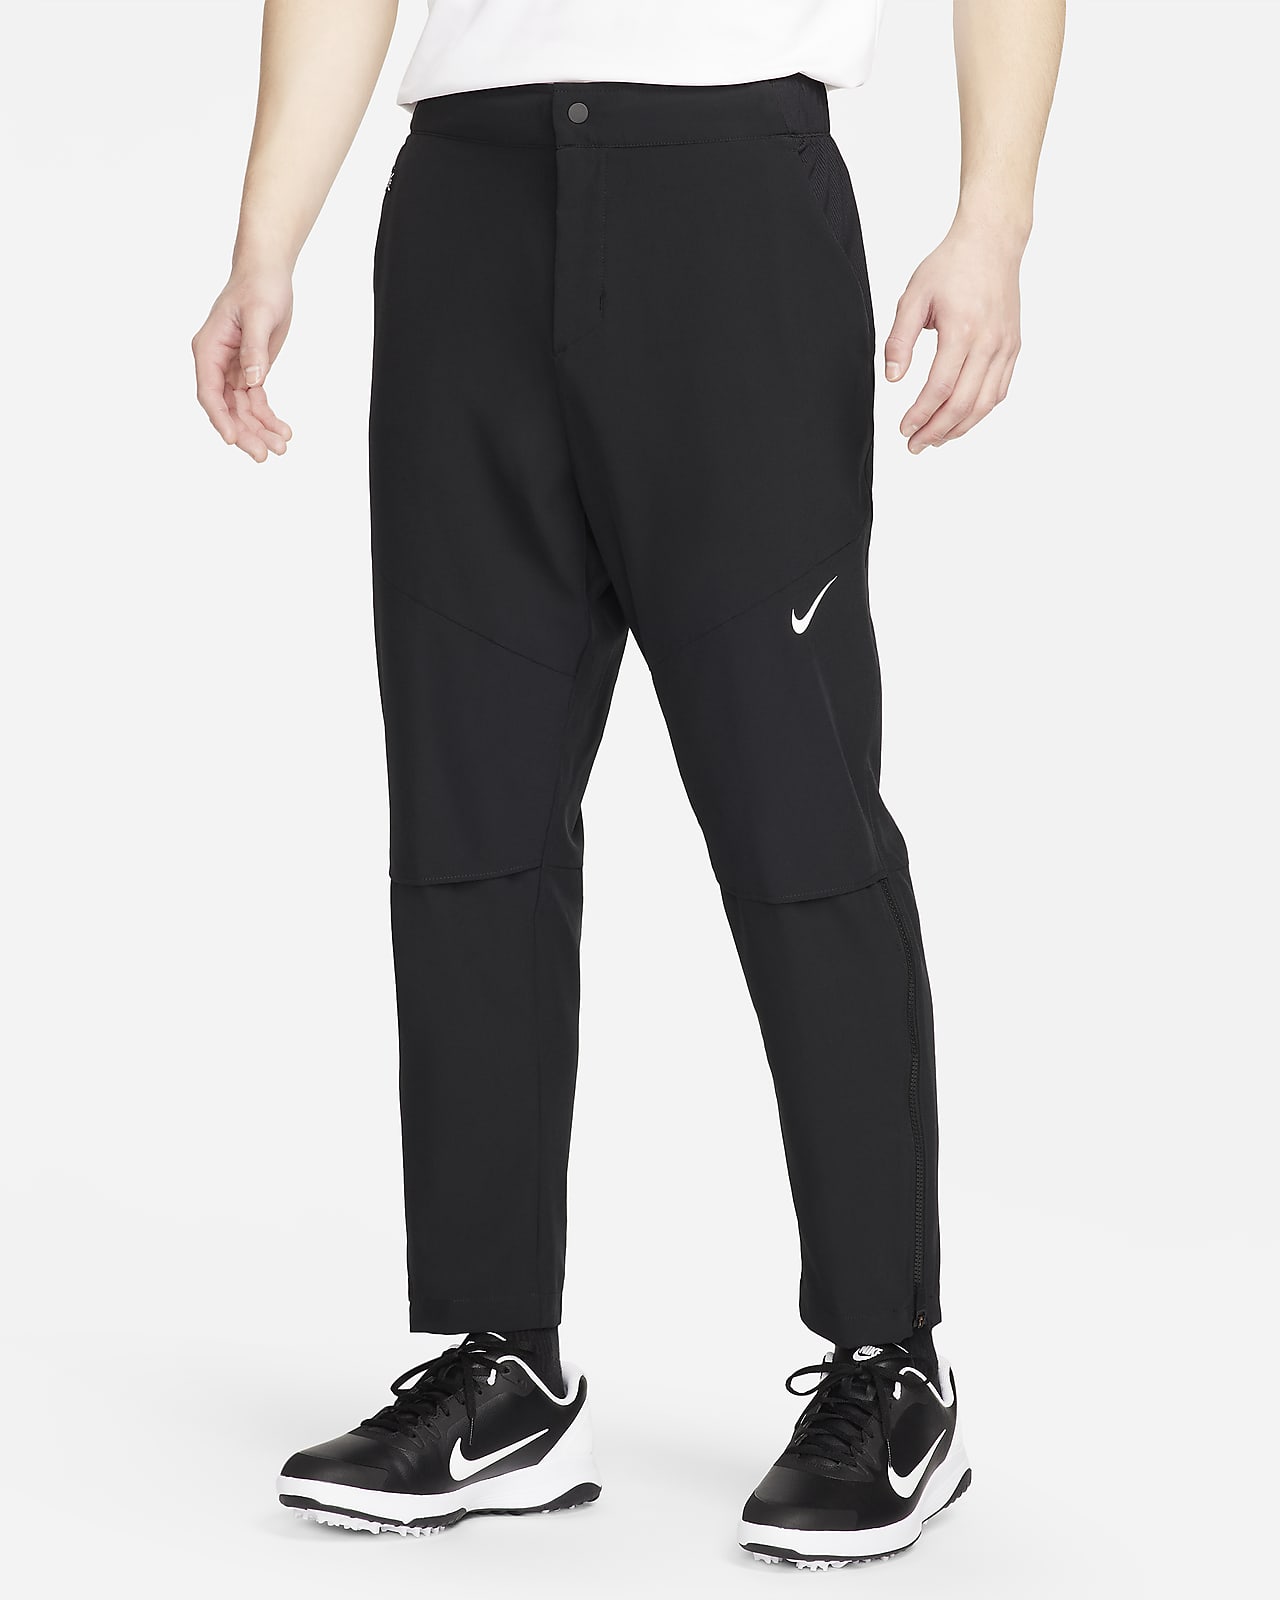 https://static.nike.com/a/images/t_PDP_1280_v1/f_auto,q_auto:eco/48e4ab21-ed3d-4aaf-b6bf-cfef4afb11d0/golf-club-dri-fit-golf-trousers-fZ7RXl.png